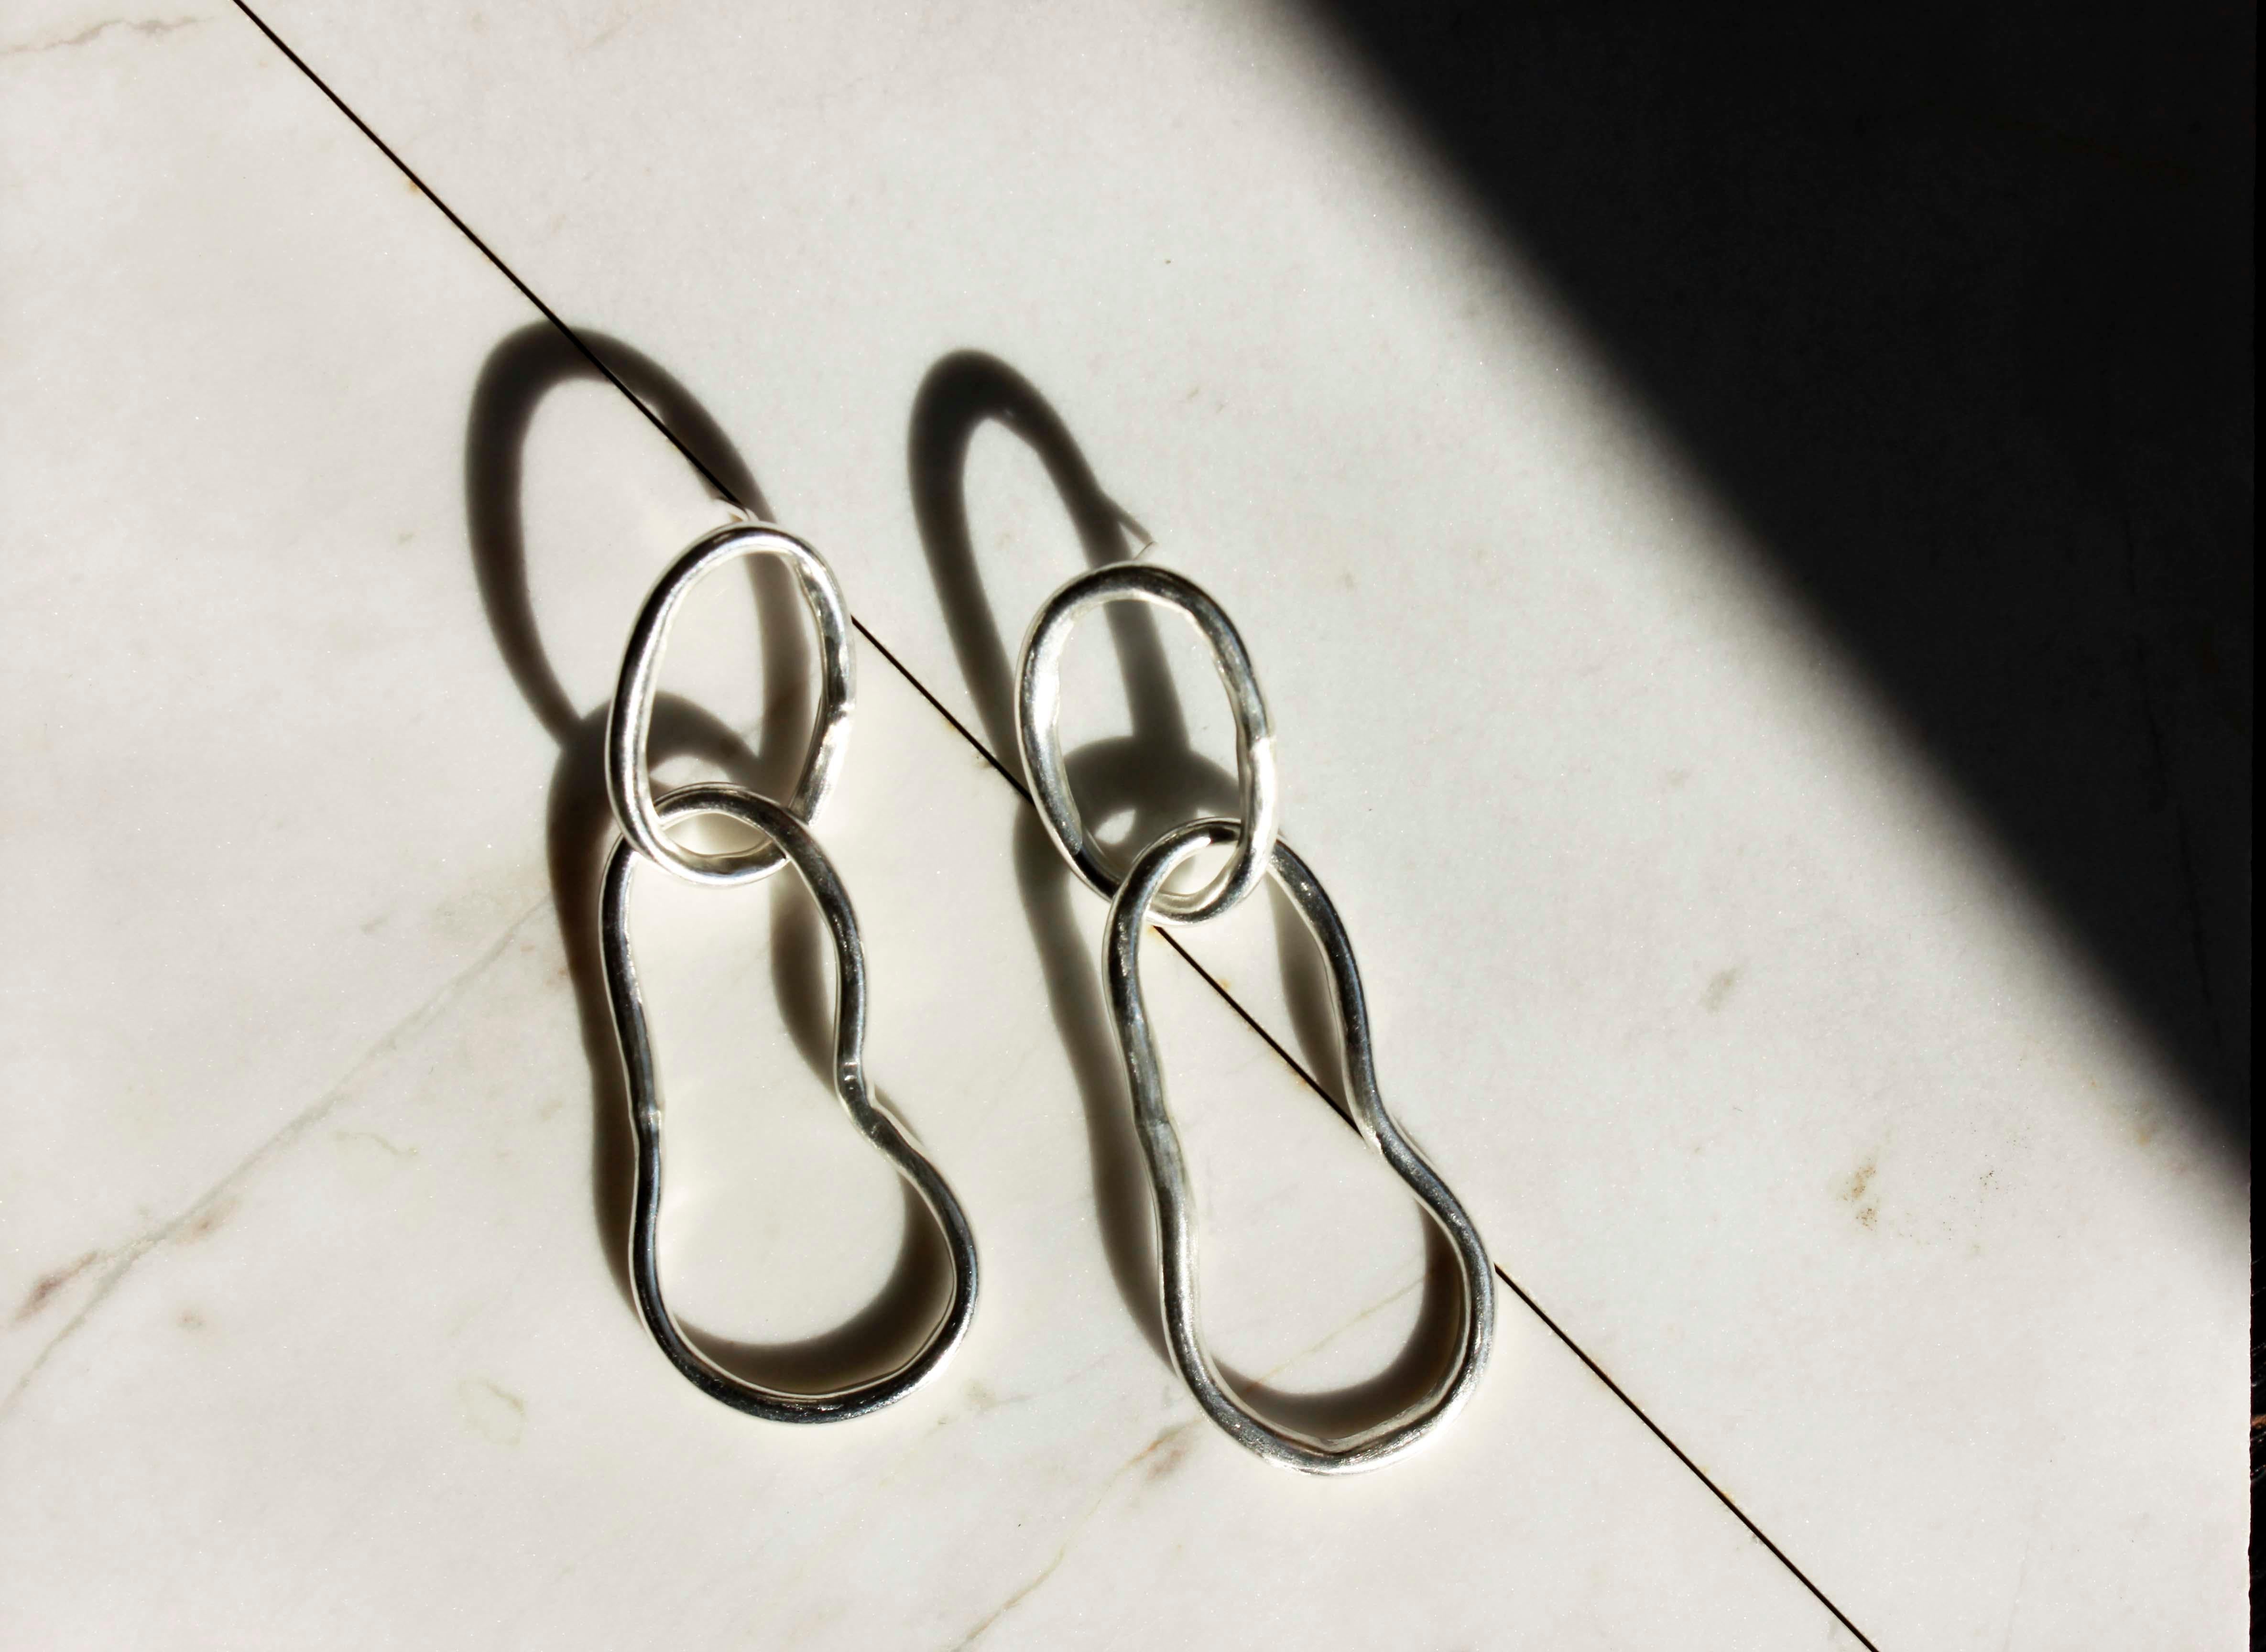 These long chain earrings are made from eco fine silver.

A statement piece that can be worn all day long, with a nice volume which will add a bold detail to your outfit.

The earrings have a playful movement.

The earrings are really light as they